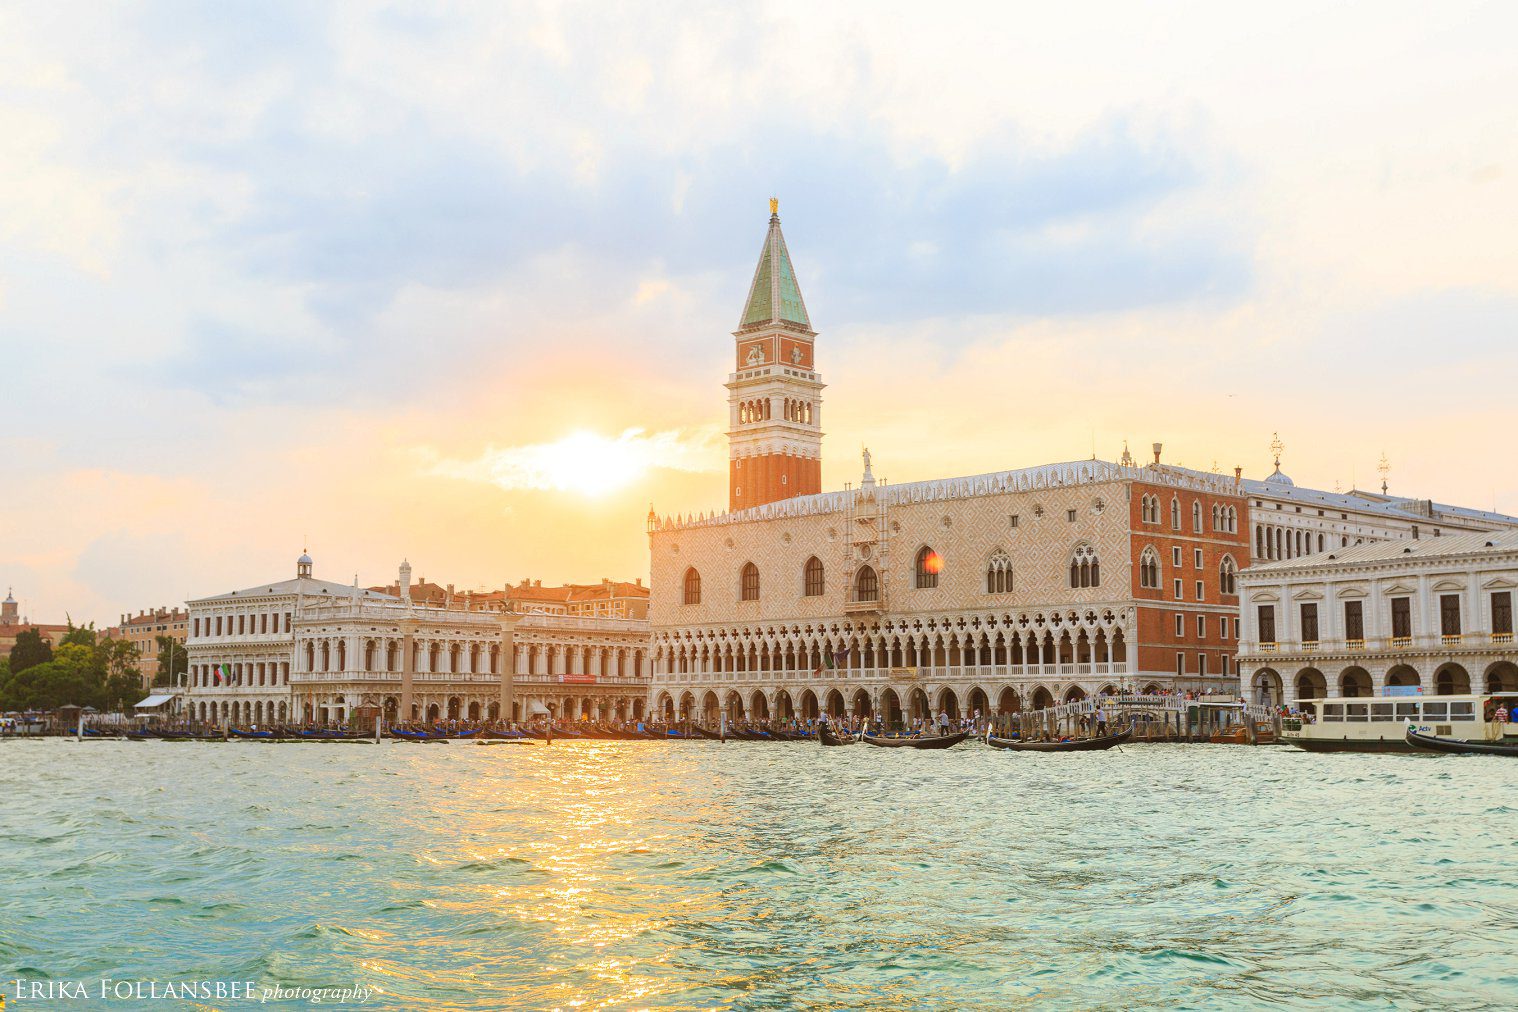 Piazza San Marco at sunset, as seen from the Grand Canal